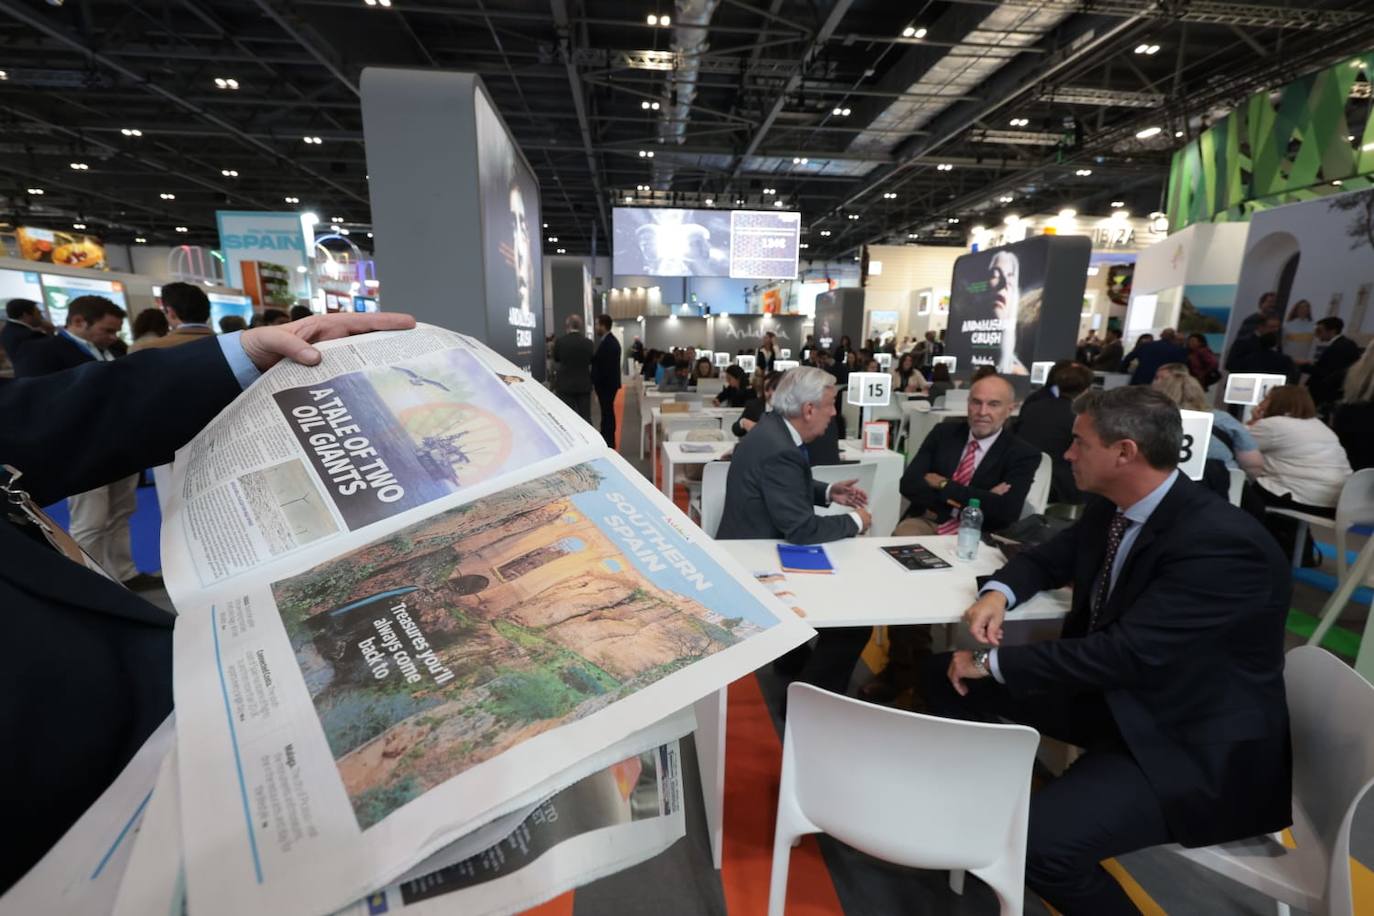 In pictures: World Travel Market in London - day one